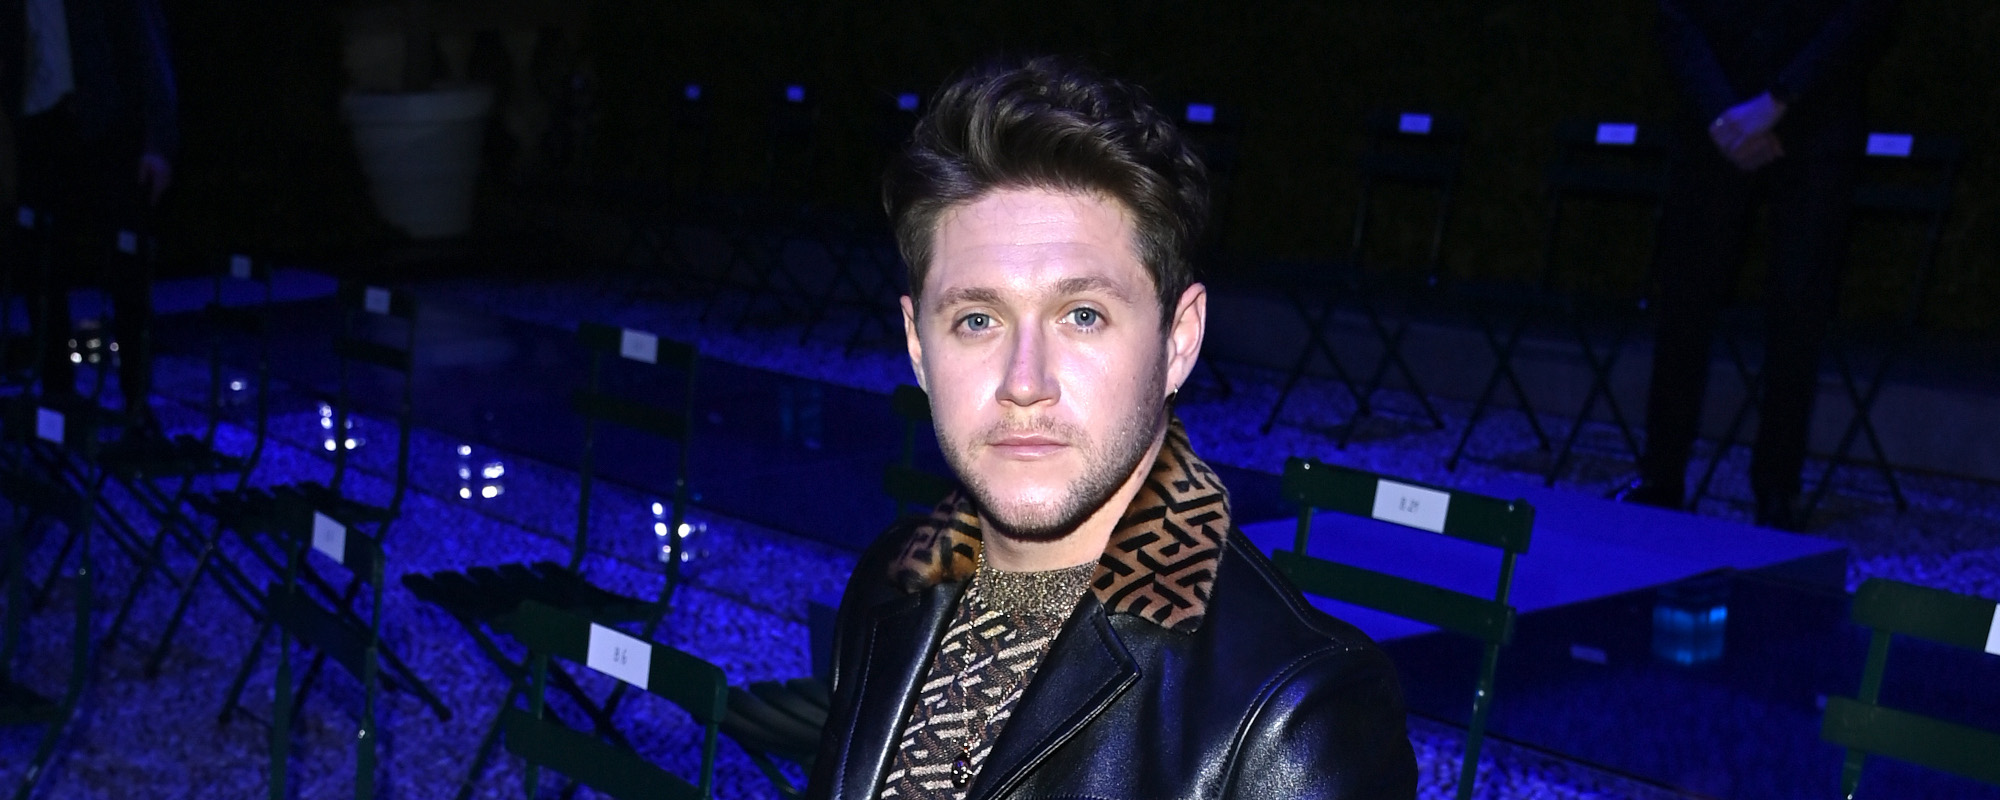 Niall Horan Credits Katy Perry for ‘X-Factor’ Success: “If It Wasn’t for Her, I Wouldn’t Be Here”